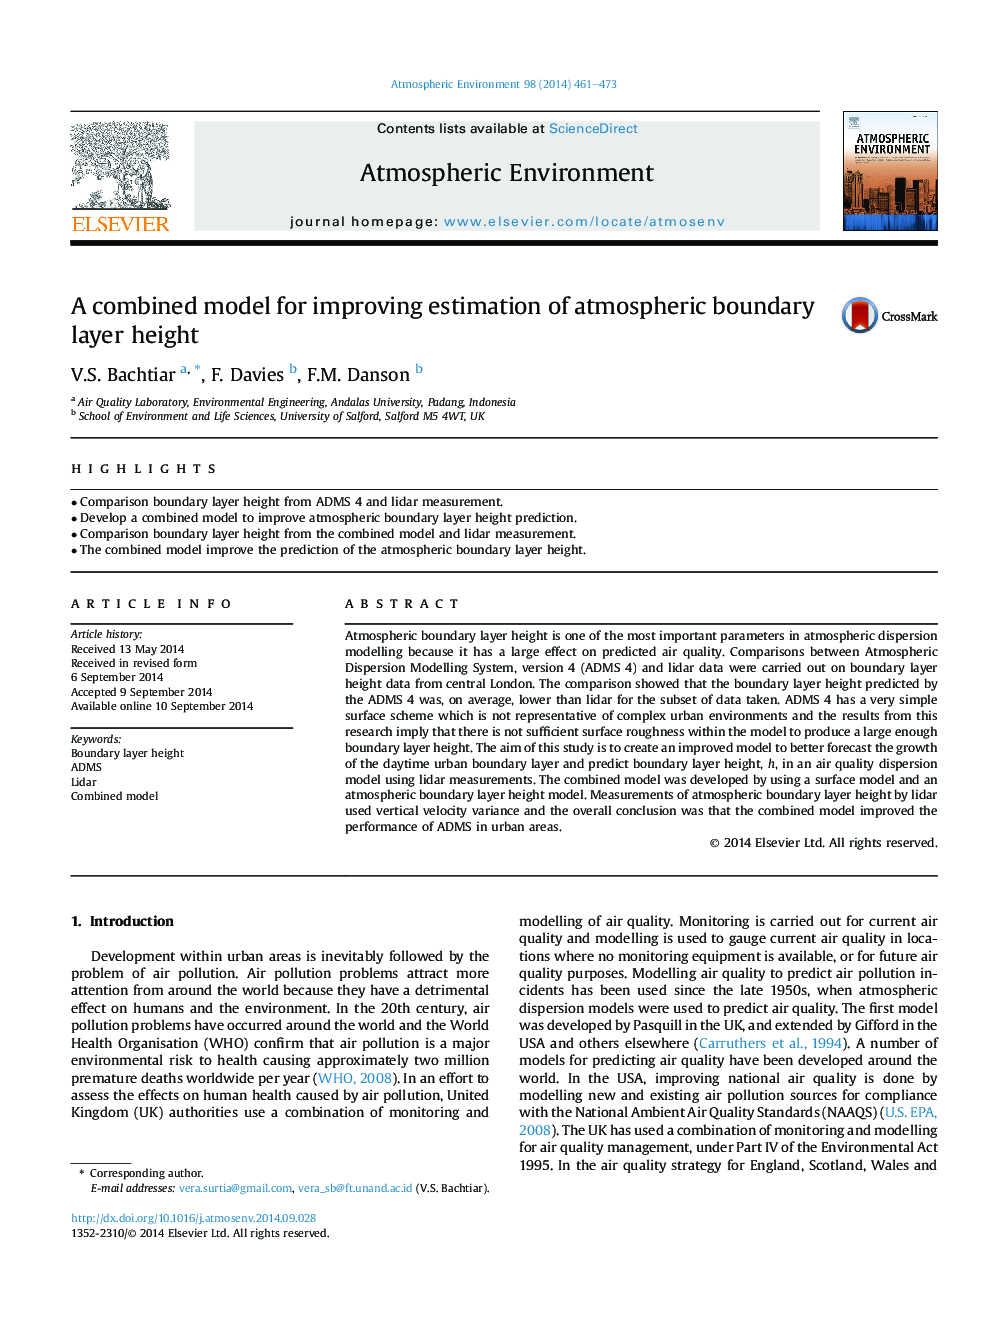 A combined model for improving estimation of atmospheric boundary layer height